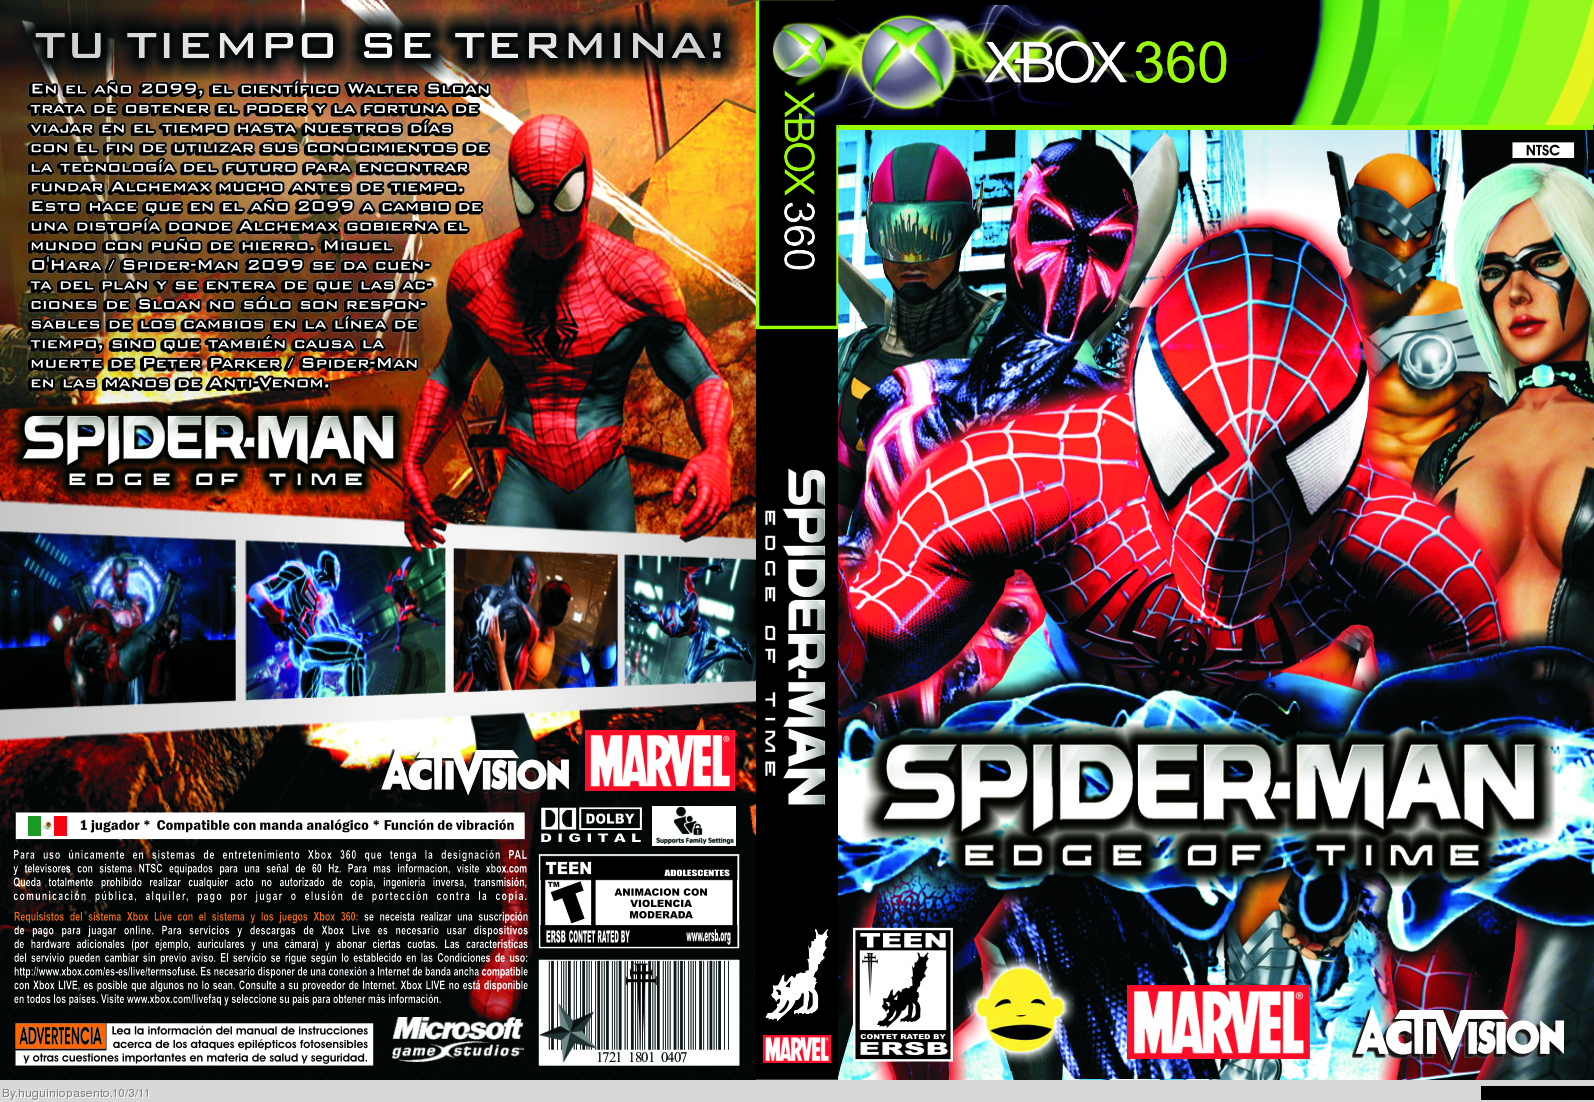 Spider-Man Edge of Time box cover